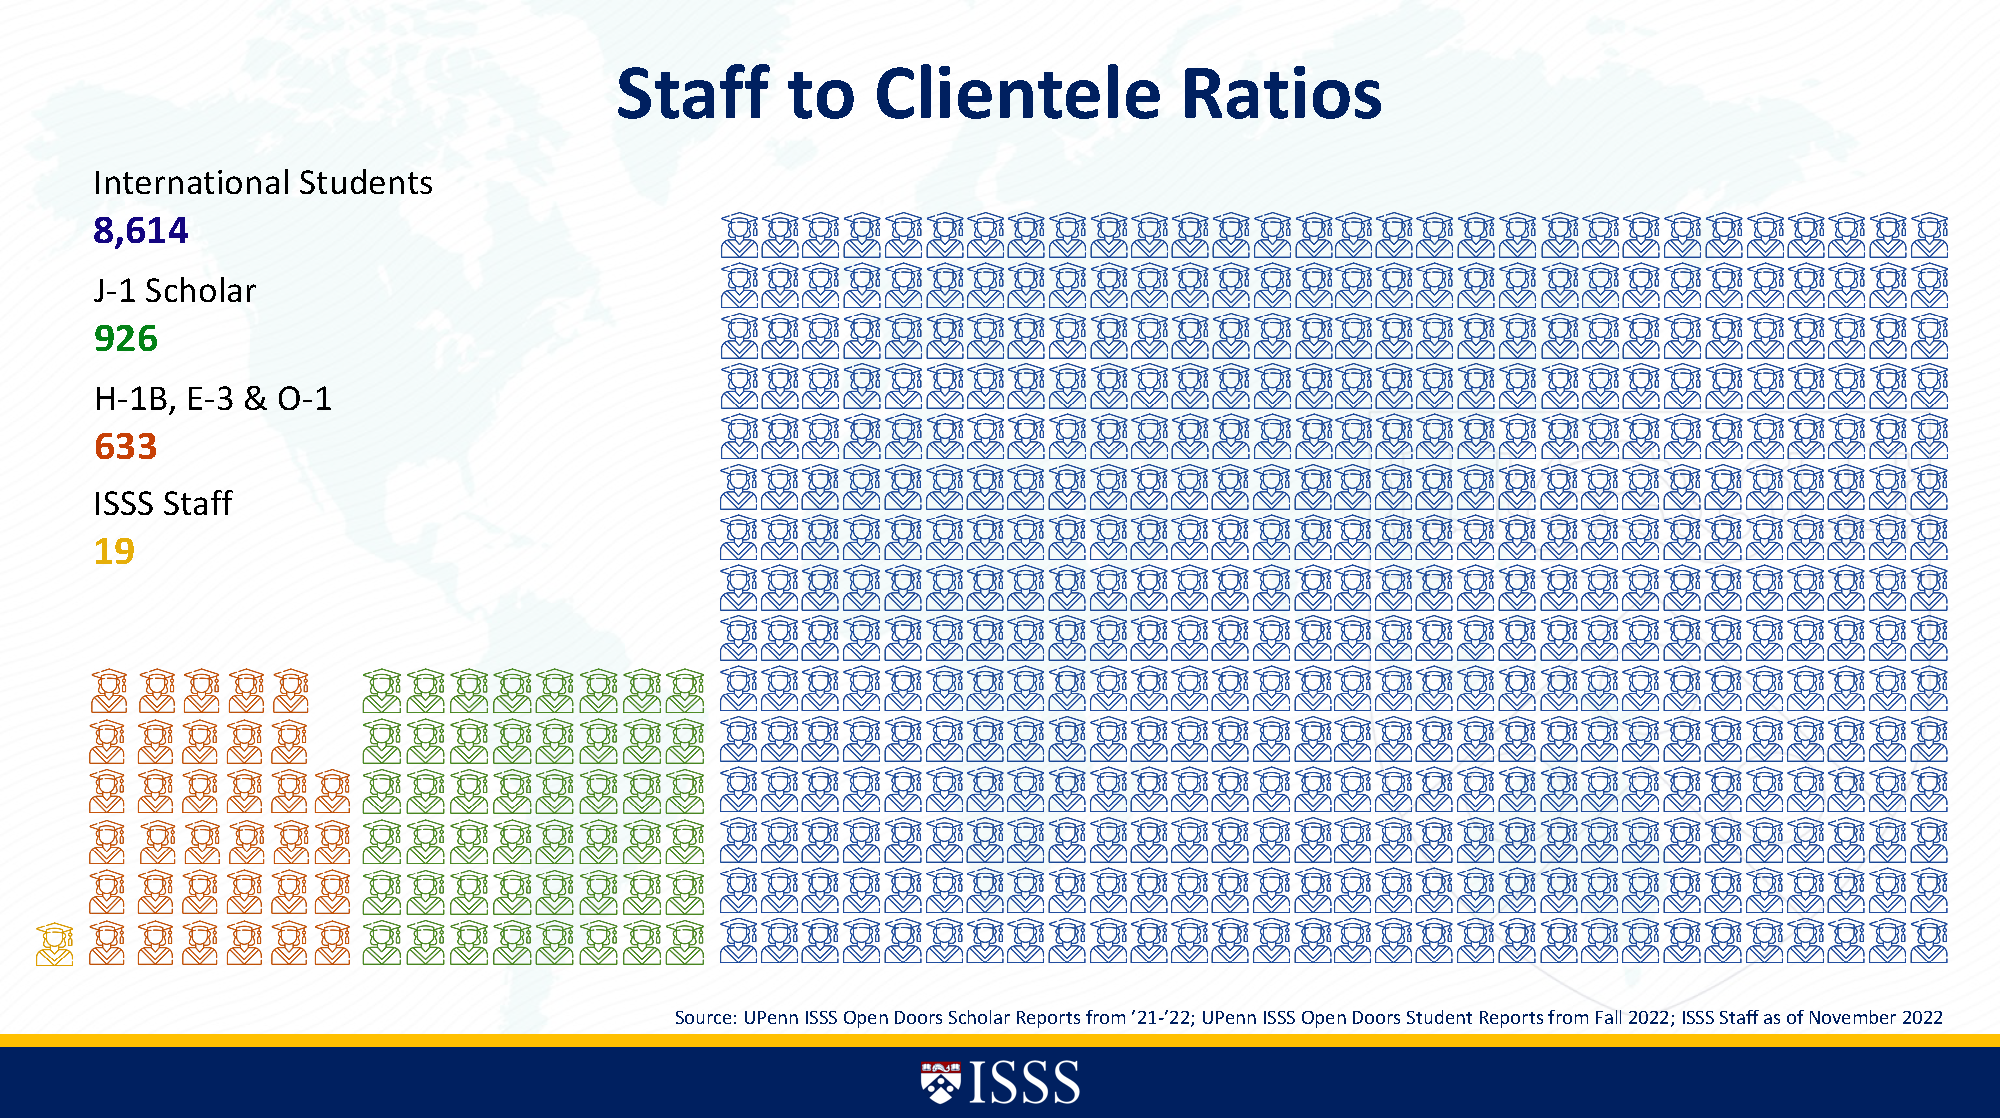 Visual of reference of ISSS staff scale of 19 to 633 H-1Bs, E-3s, O-1s, 926 J-1 Scholars, and 8164 International Students